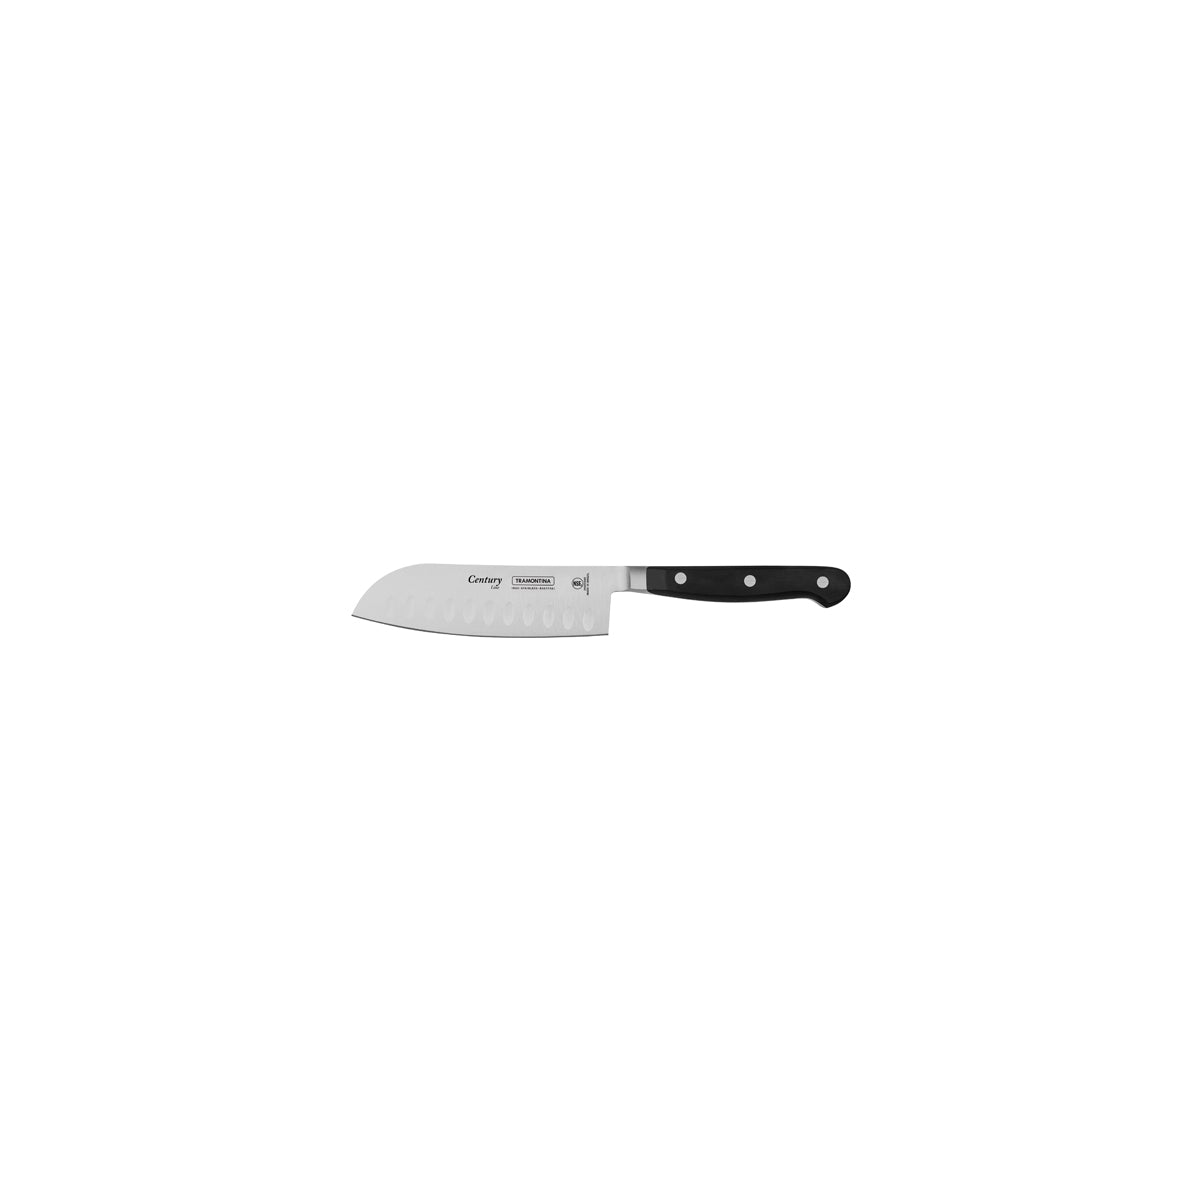 TM24020/005 Tramontina Century Cooks Knife Curved Blade with Forged Handle Black 127mm Tomkin Australia Hospitality Supplies